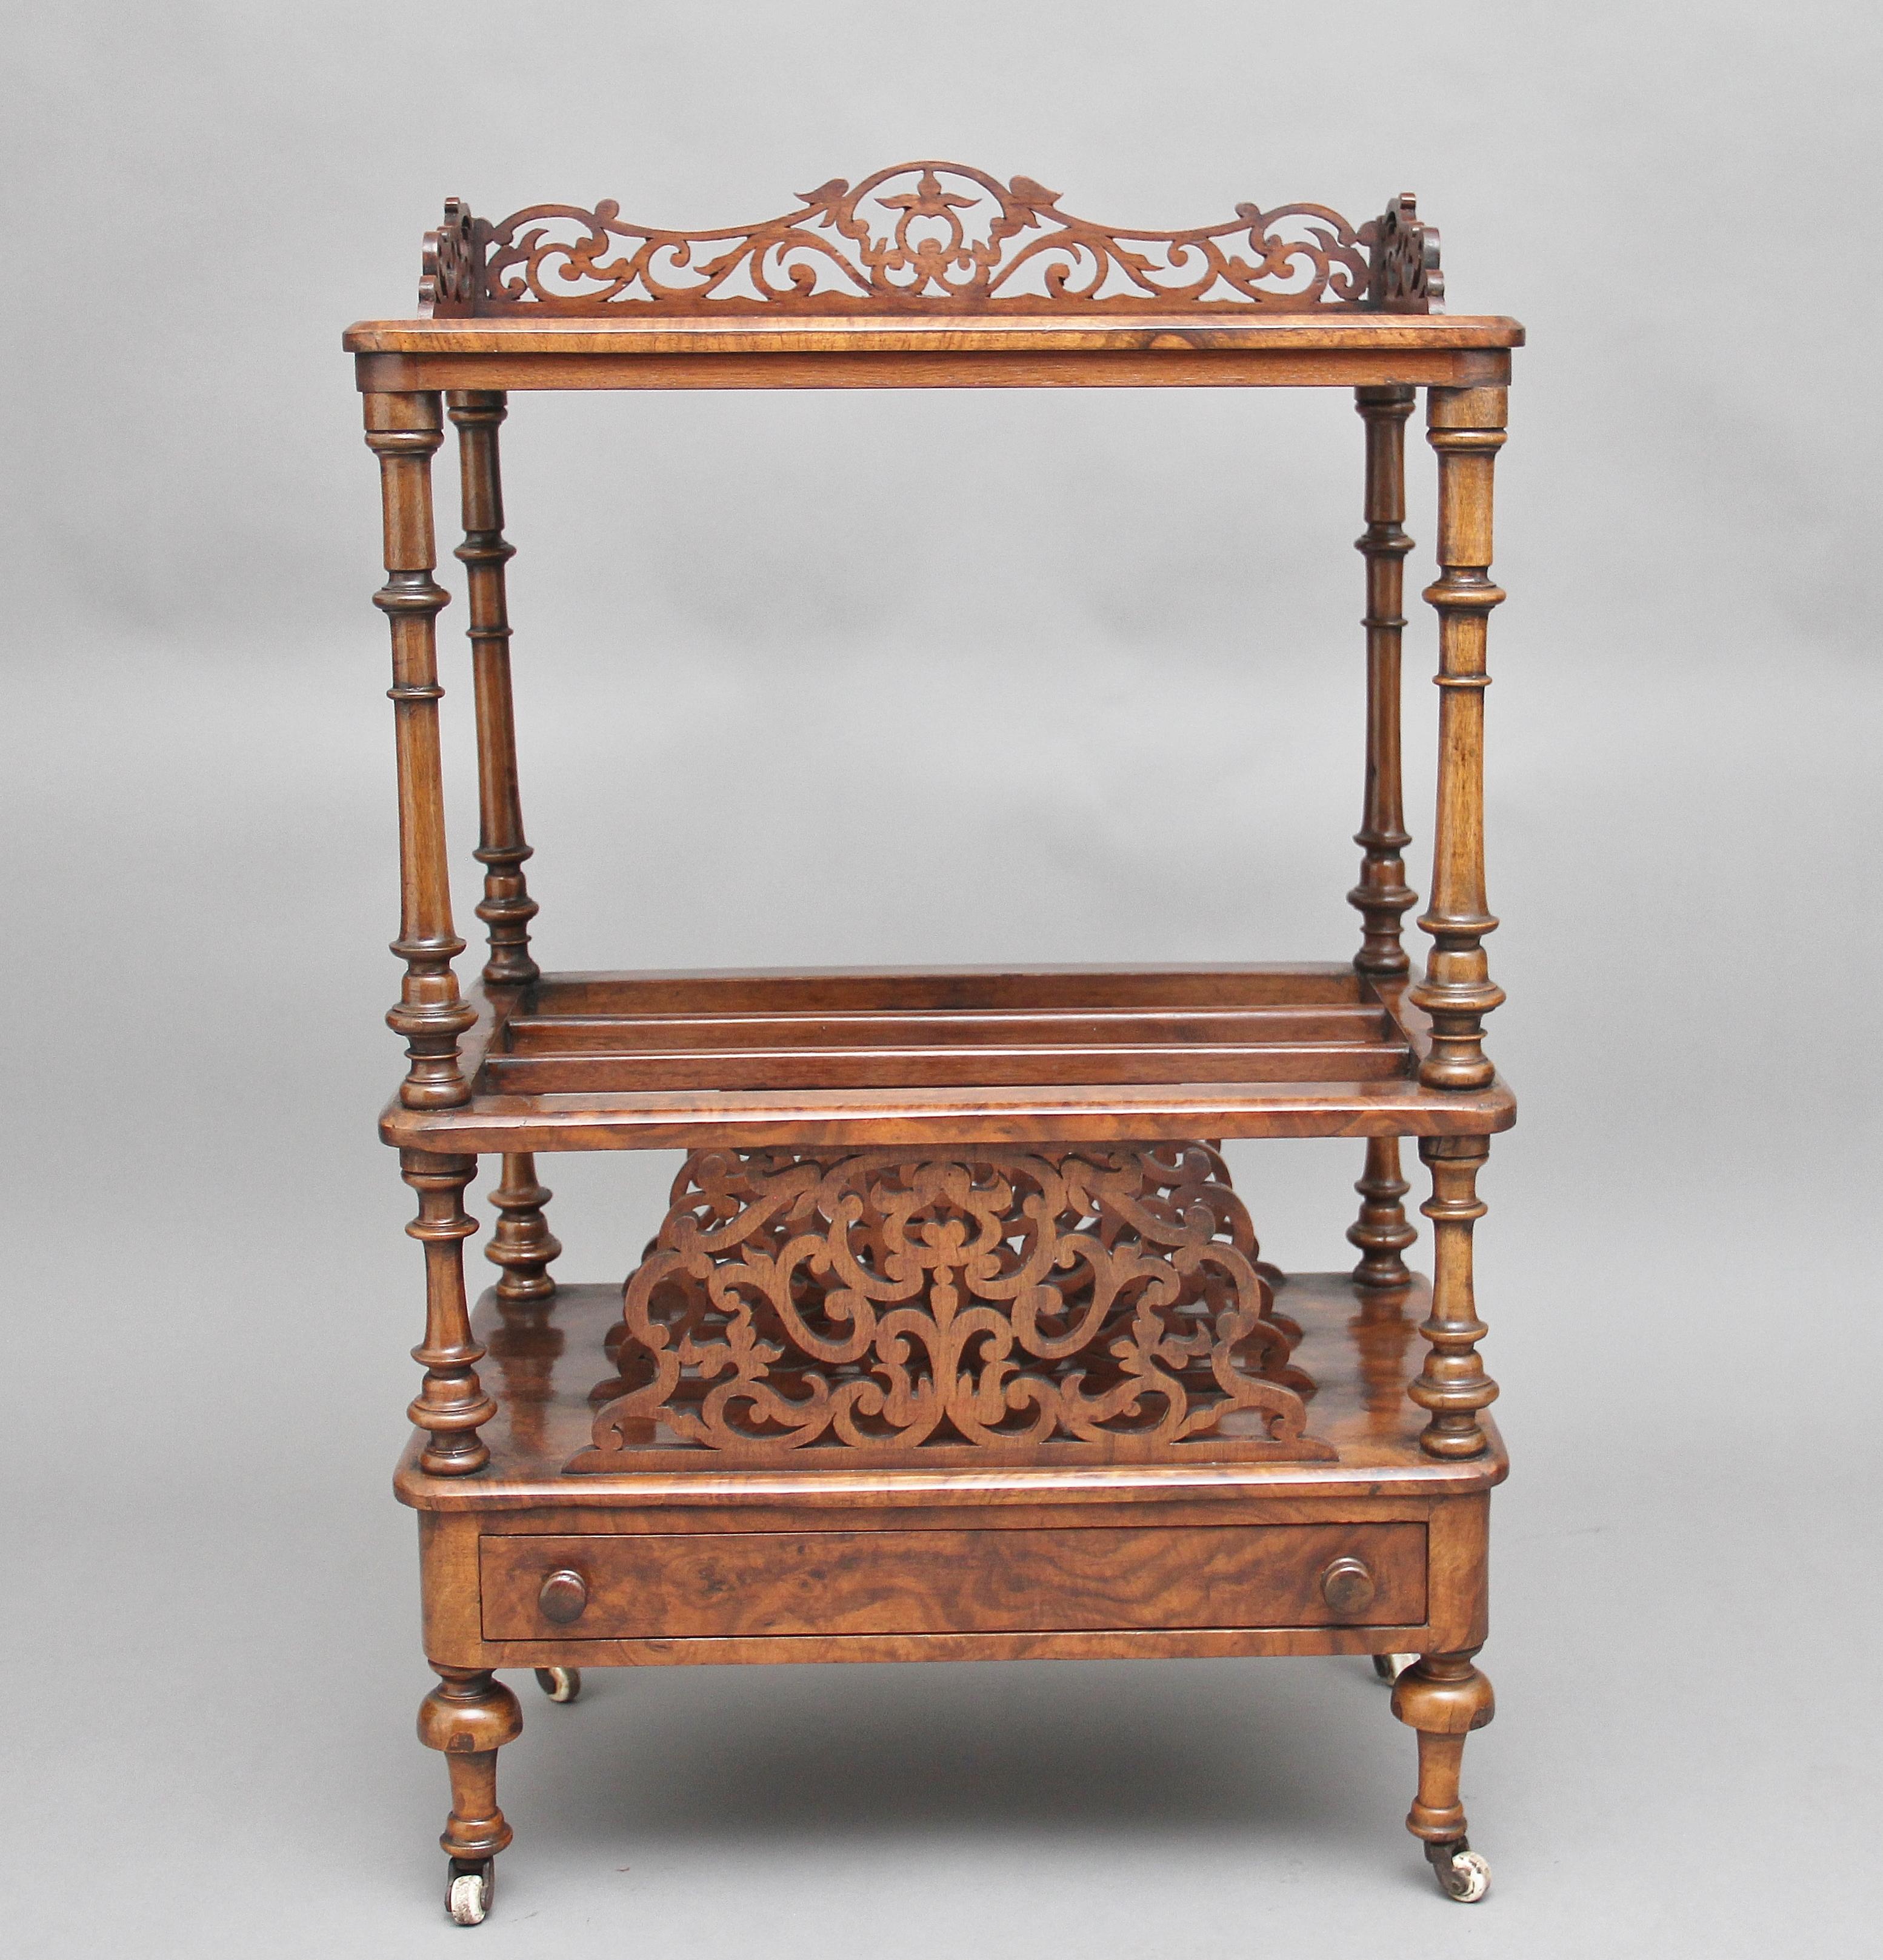 19th century burr walnut canterbury, the burr walnut top having a pierced and carved gallery, supported on finely turned columns, the middle section having three divisions which is divided by finely carved and pierced splats, having a single drawer